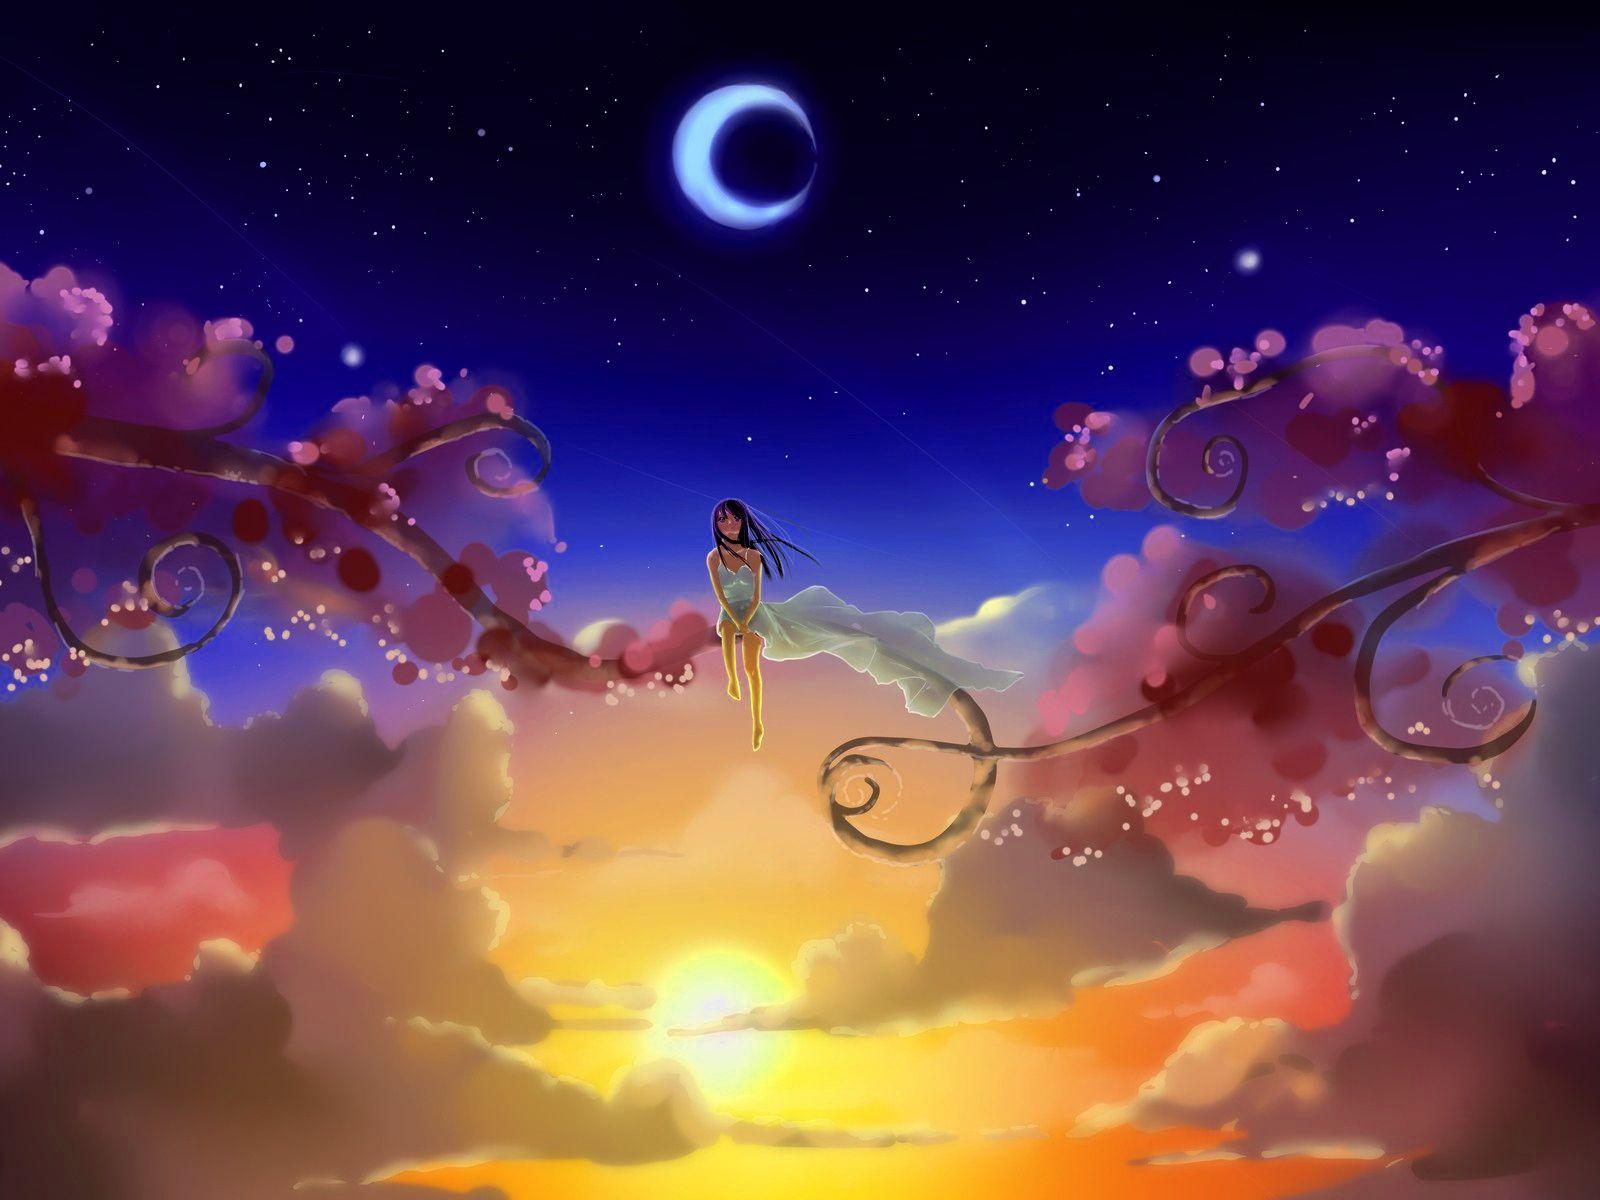 Anime Dream World 333048 Hd Wallpaper And Backgrounds Download